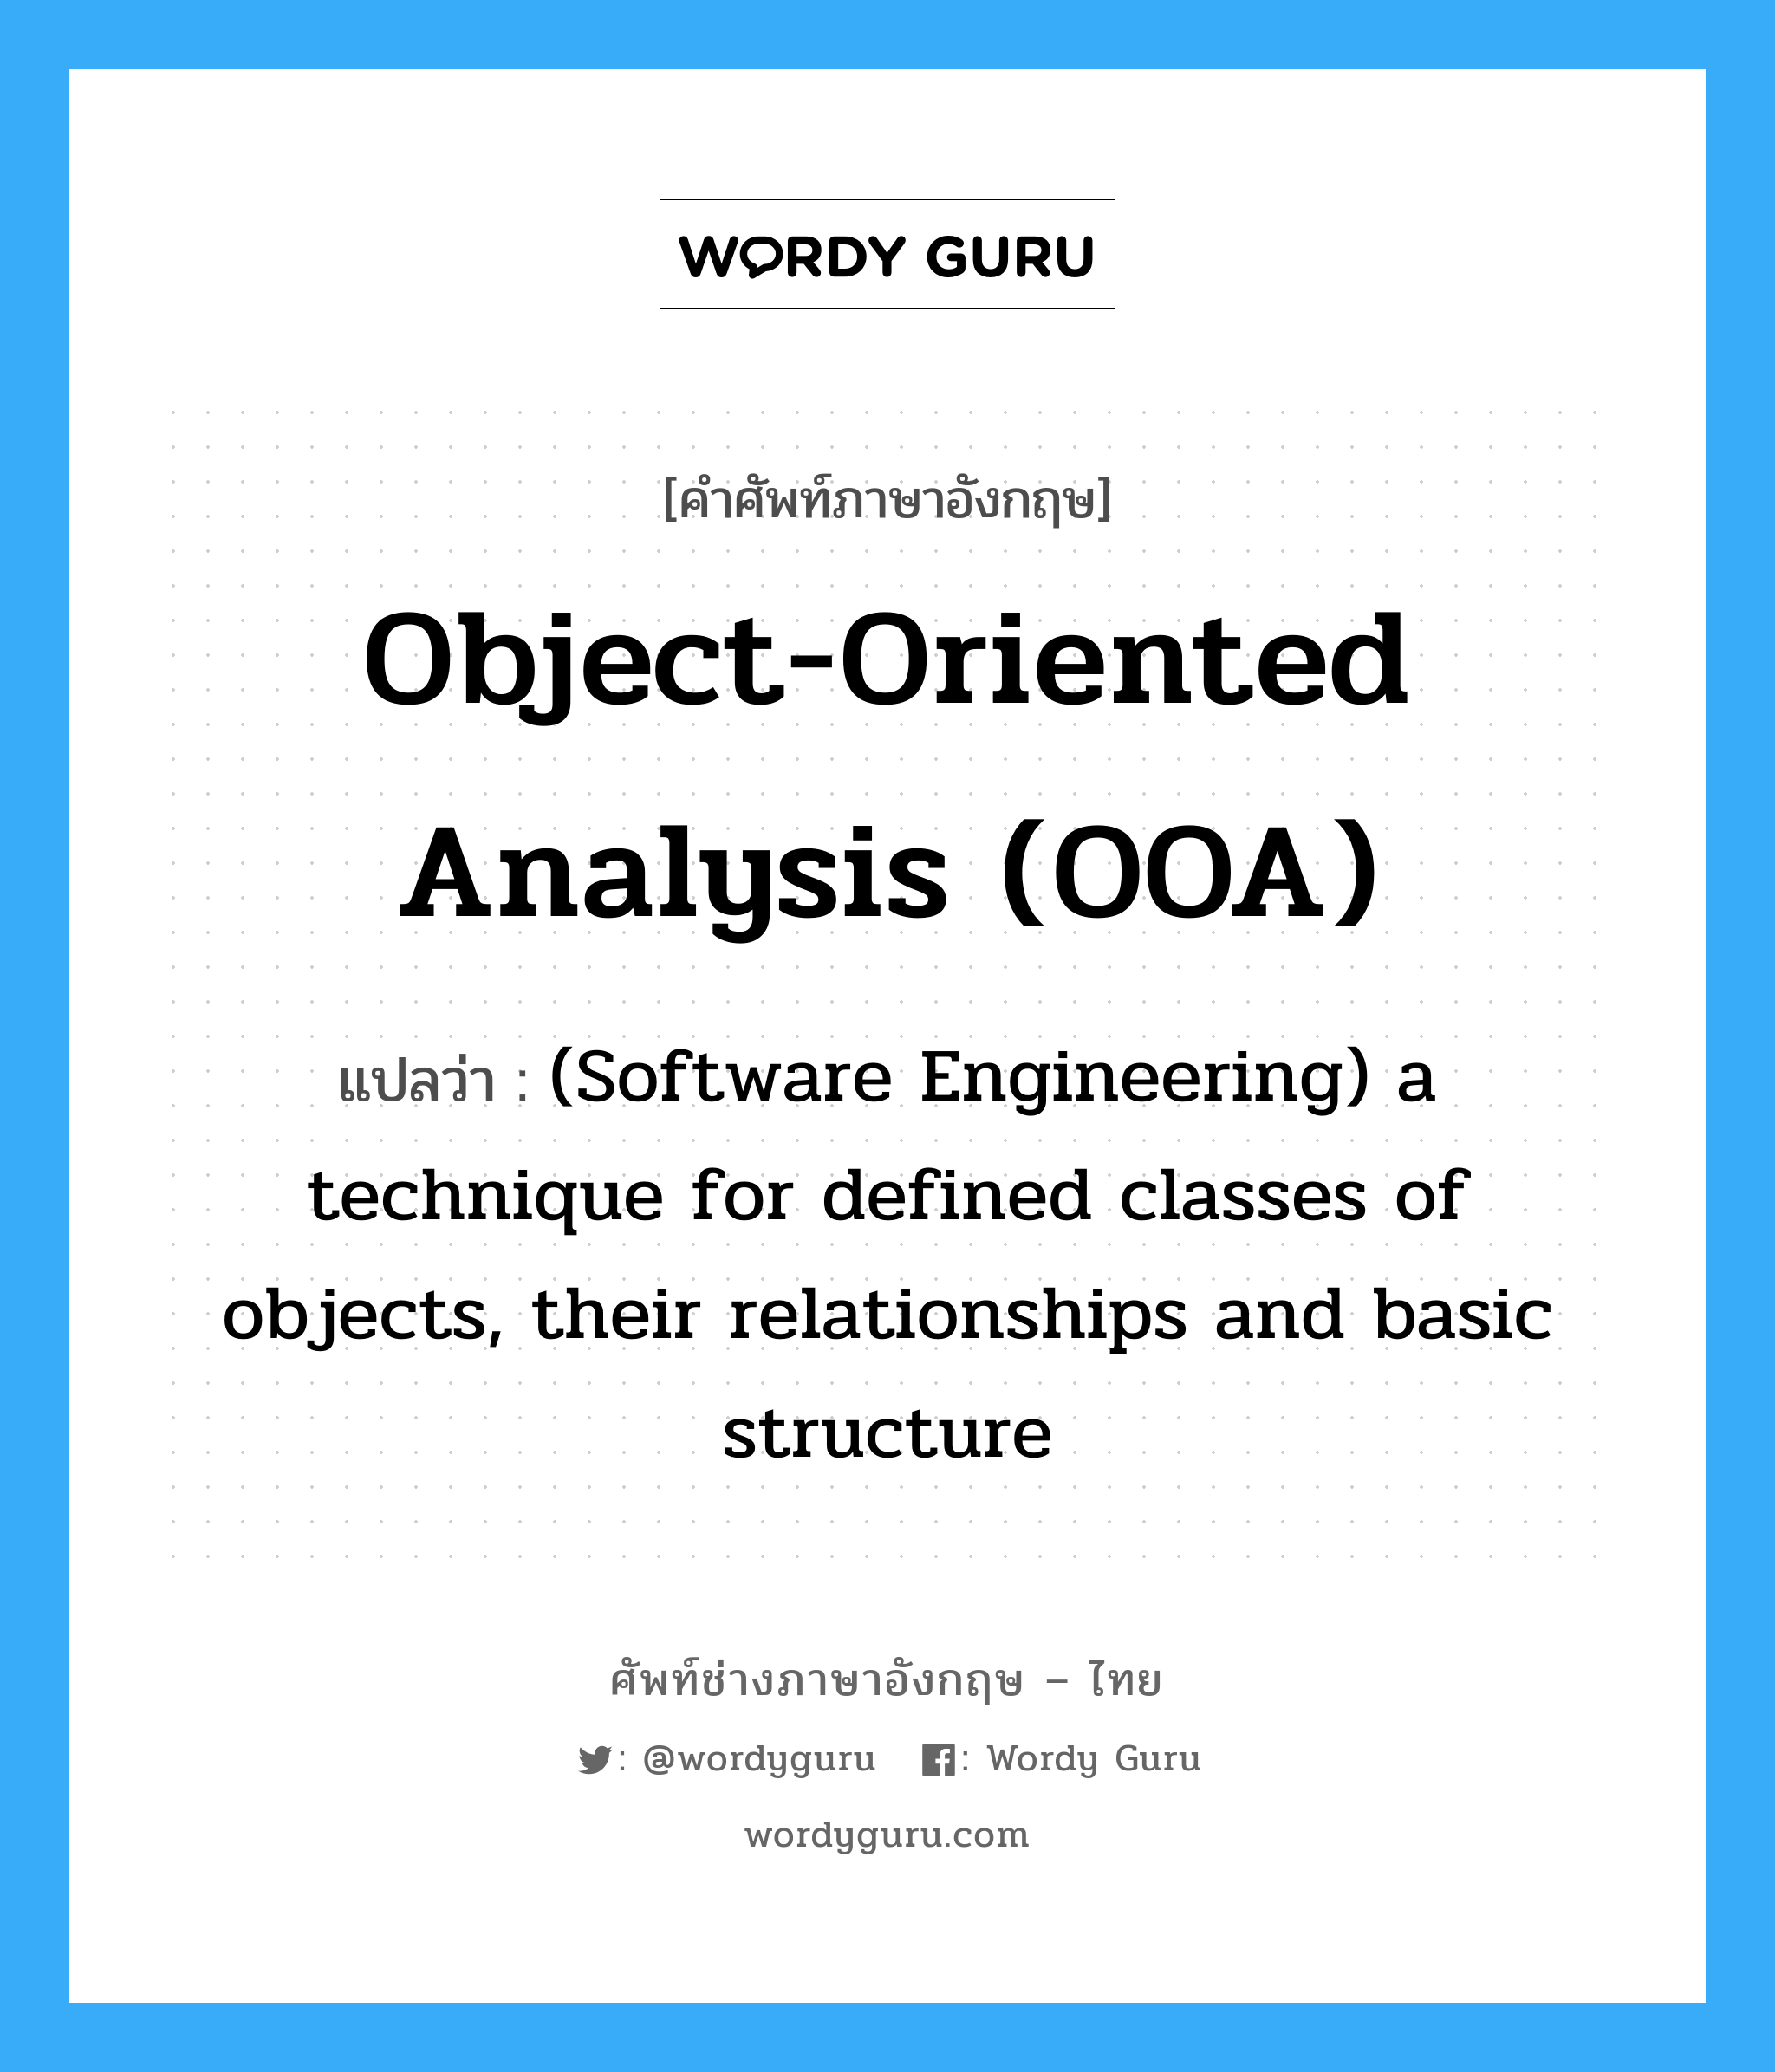 Object-oriented analysis (OOA) แปลว่า?, คำศัพท์ช่างภาษาอังกฤษ - ไทย Object-oriented analysis (OOA) คำศัพท์ภาษาอังกฤษ Object-oriented analysis (OOA) แปลว่า (Software Engineering) a technique for defined classes of objects, their relationships and basic structure